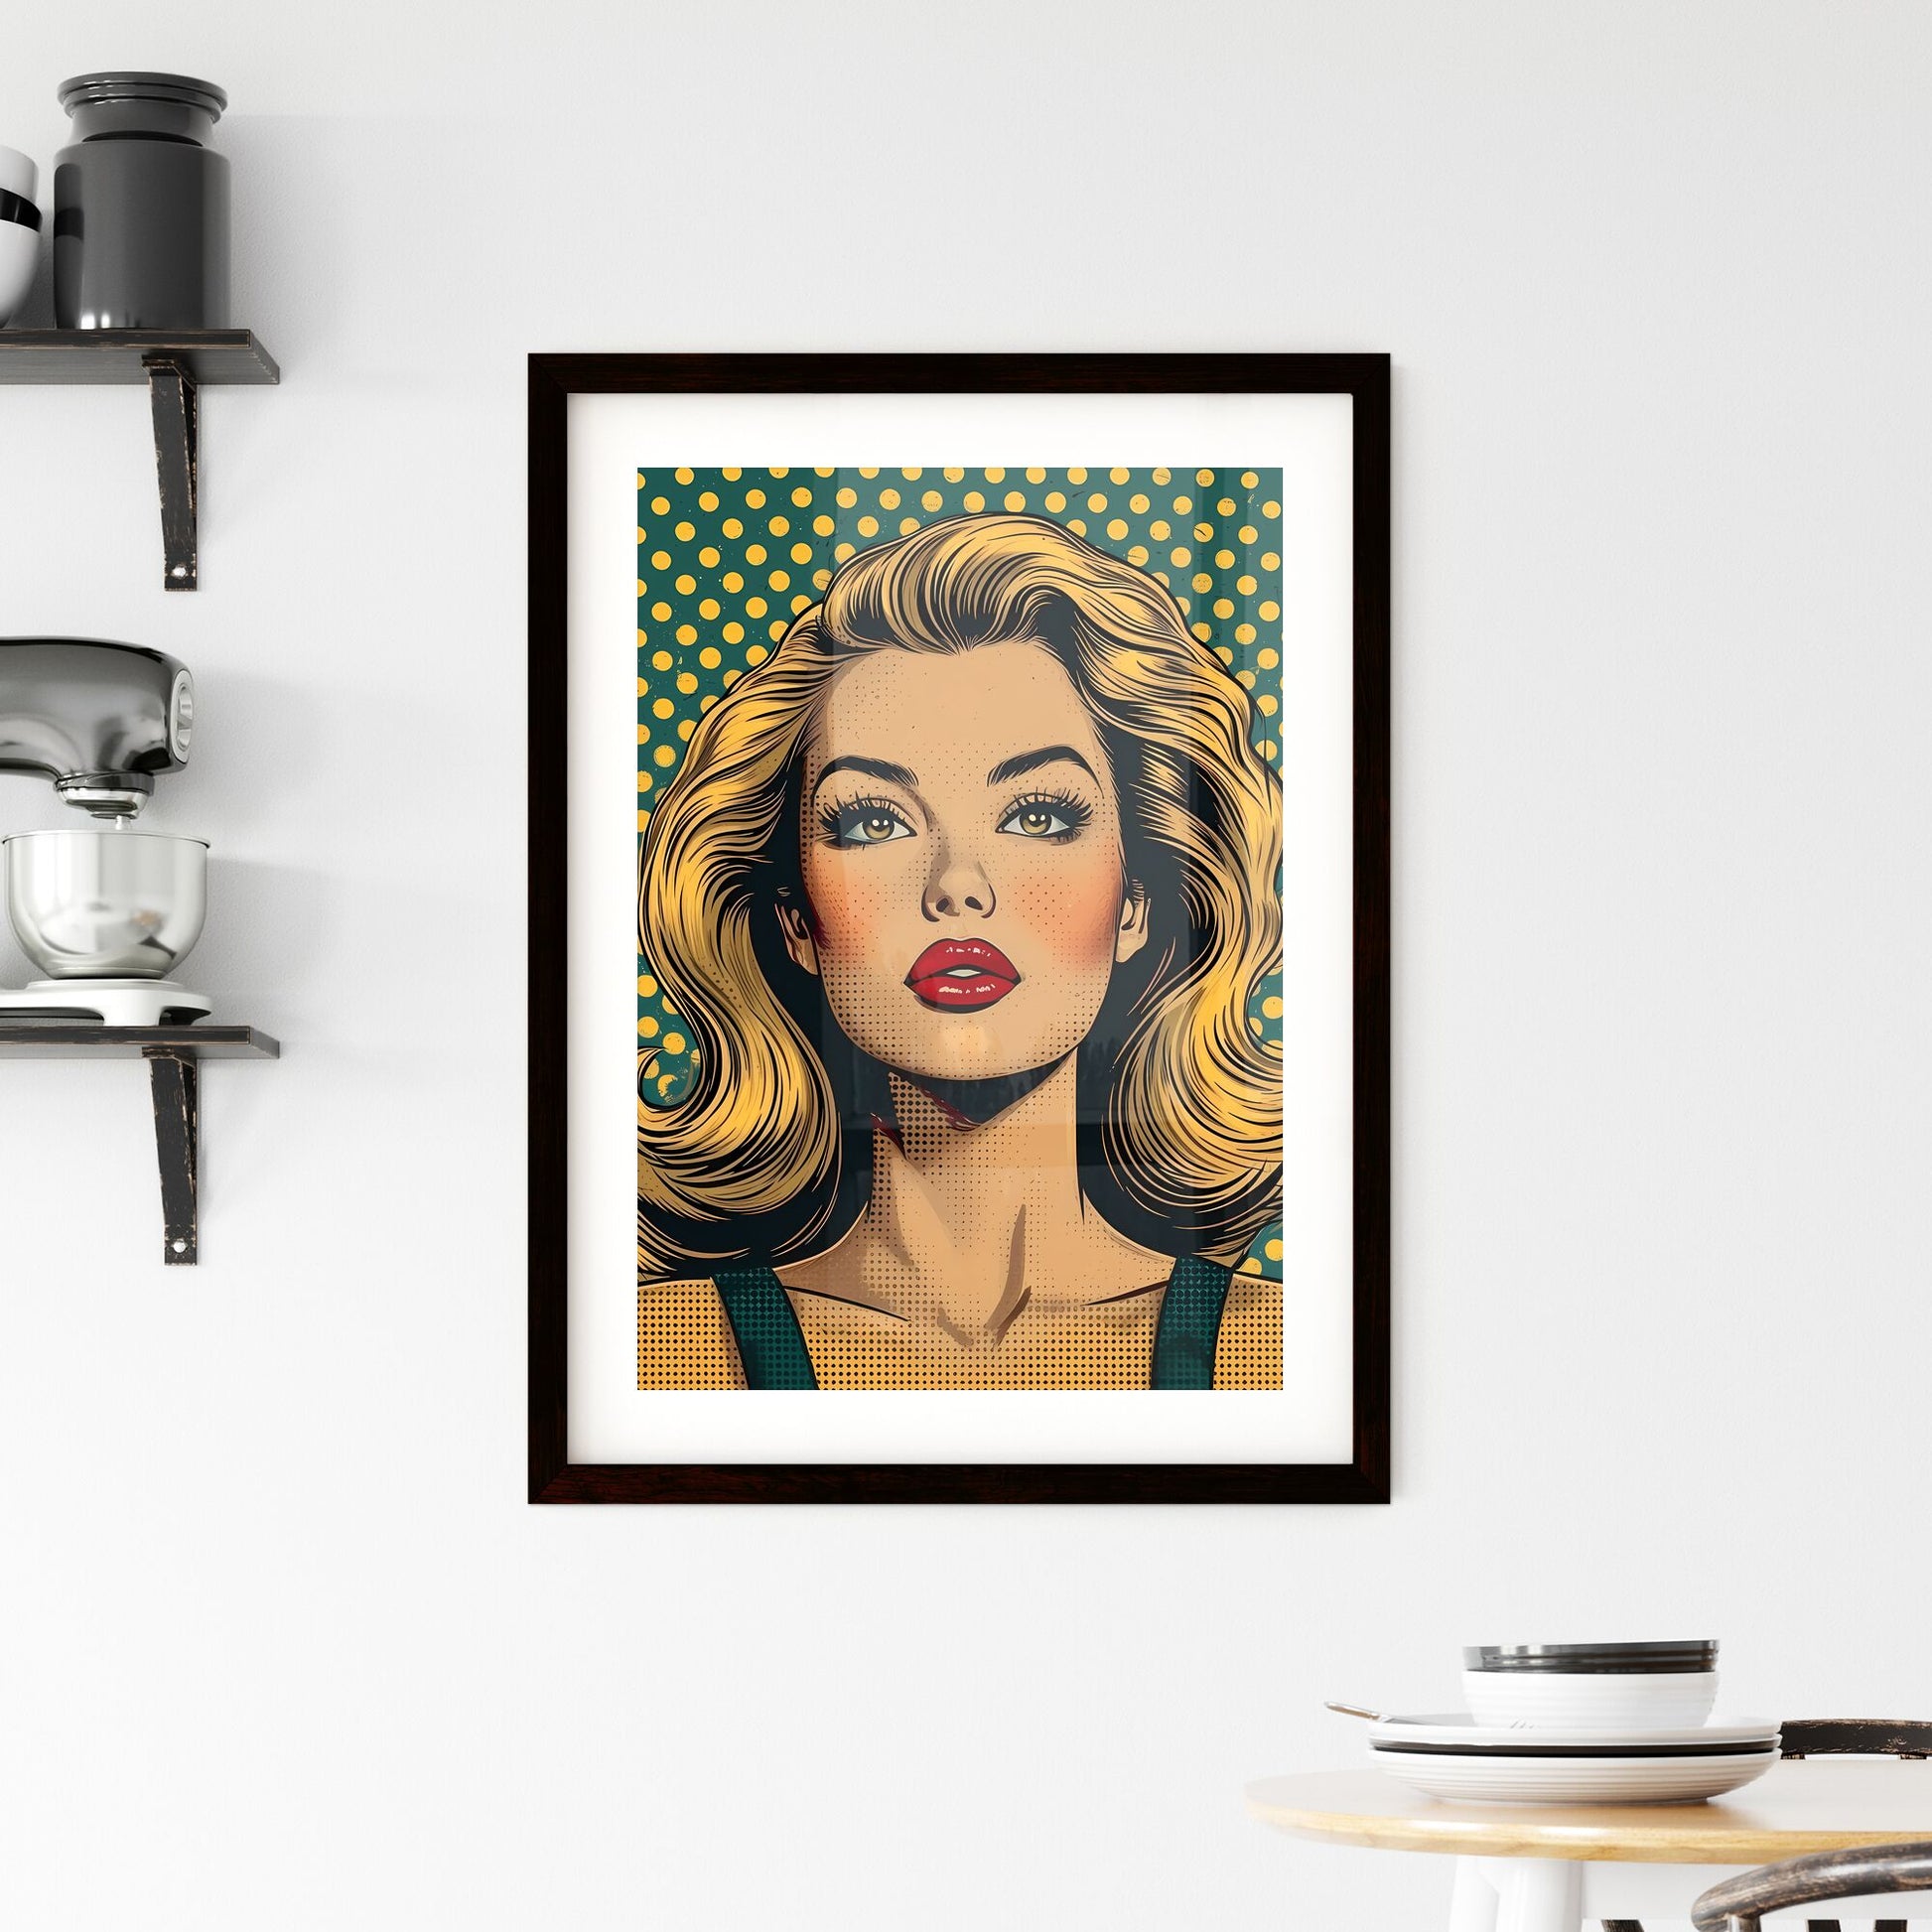 Vectorial illustration of vintage flames - Art print of a woman with blonde hair and red lips Default Title